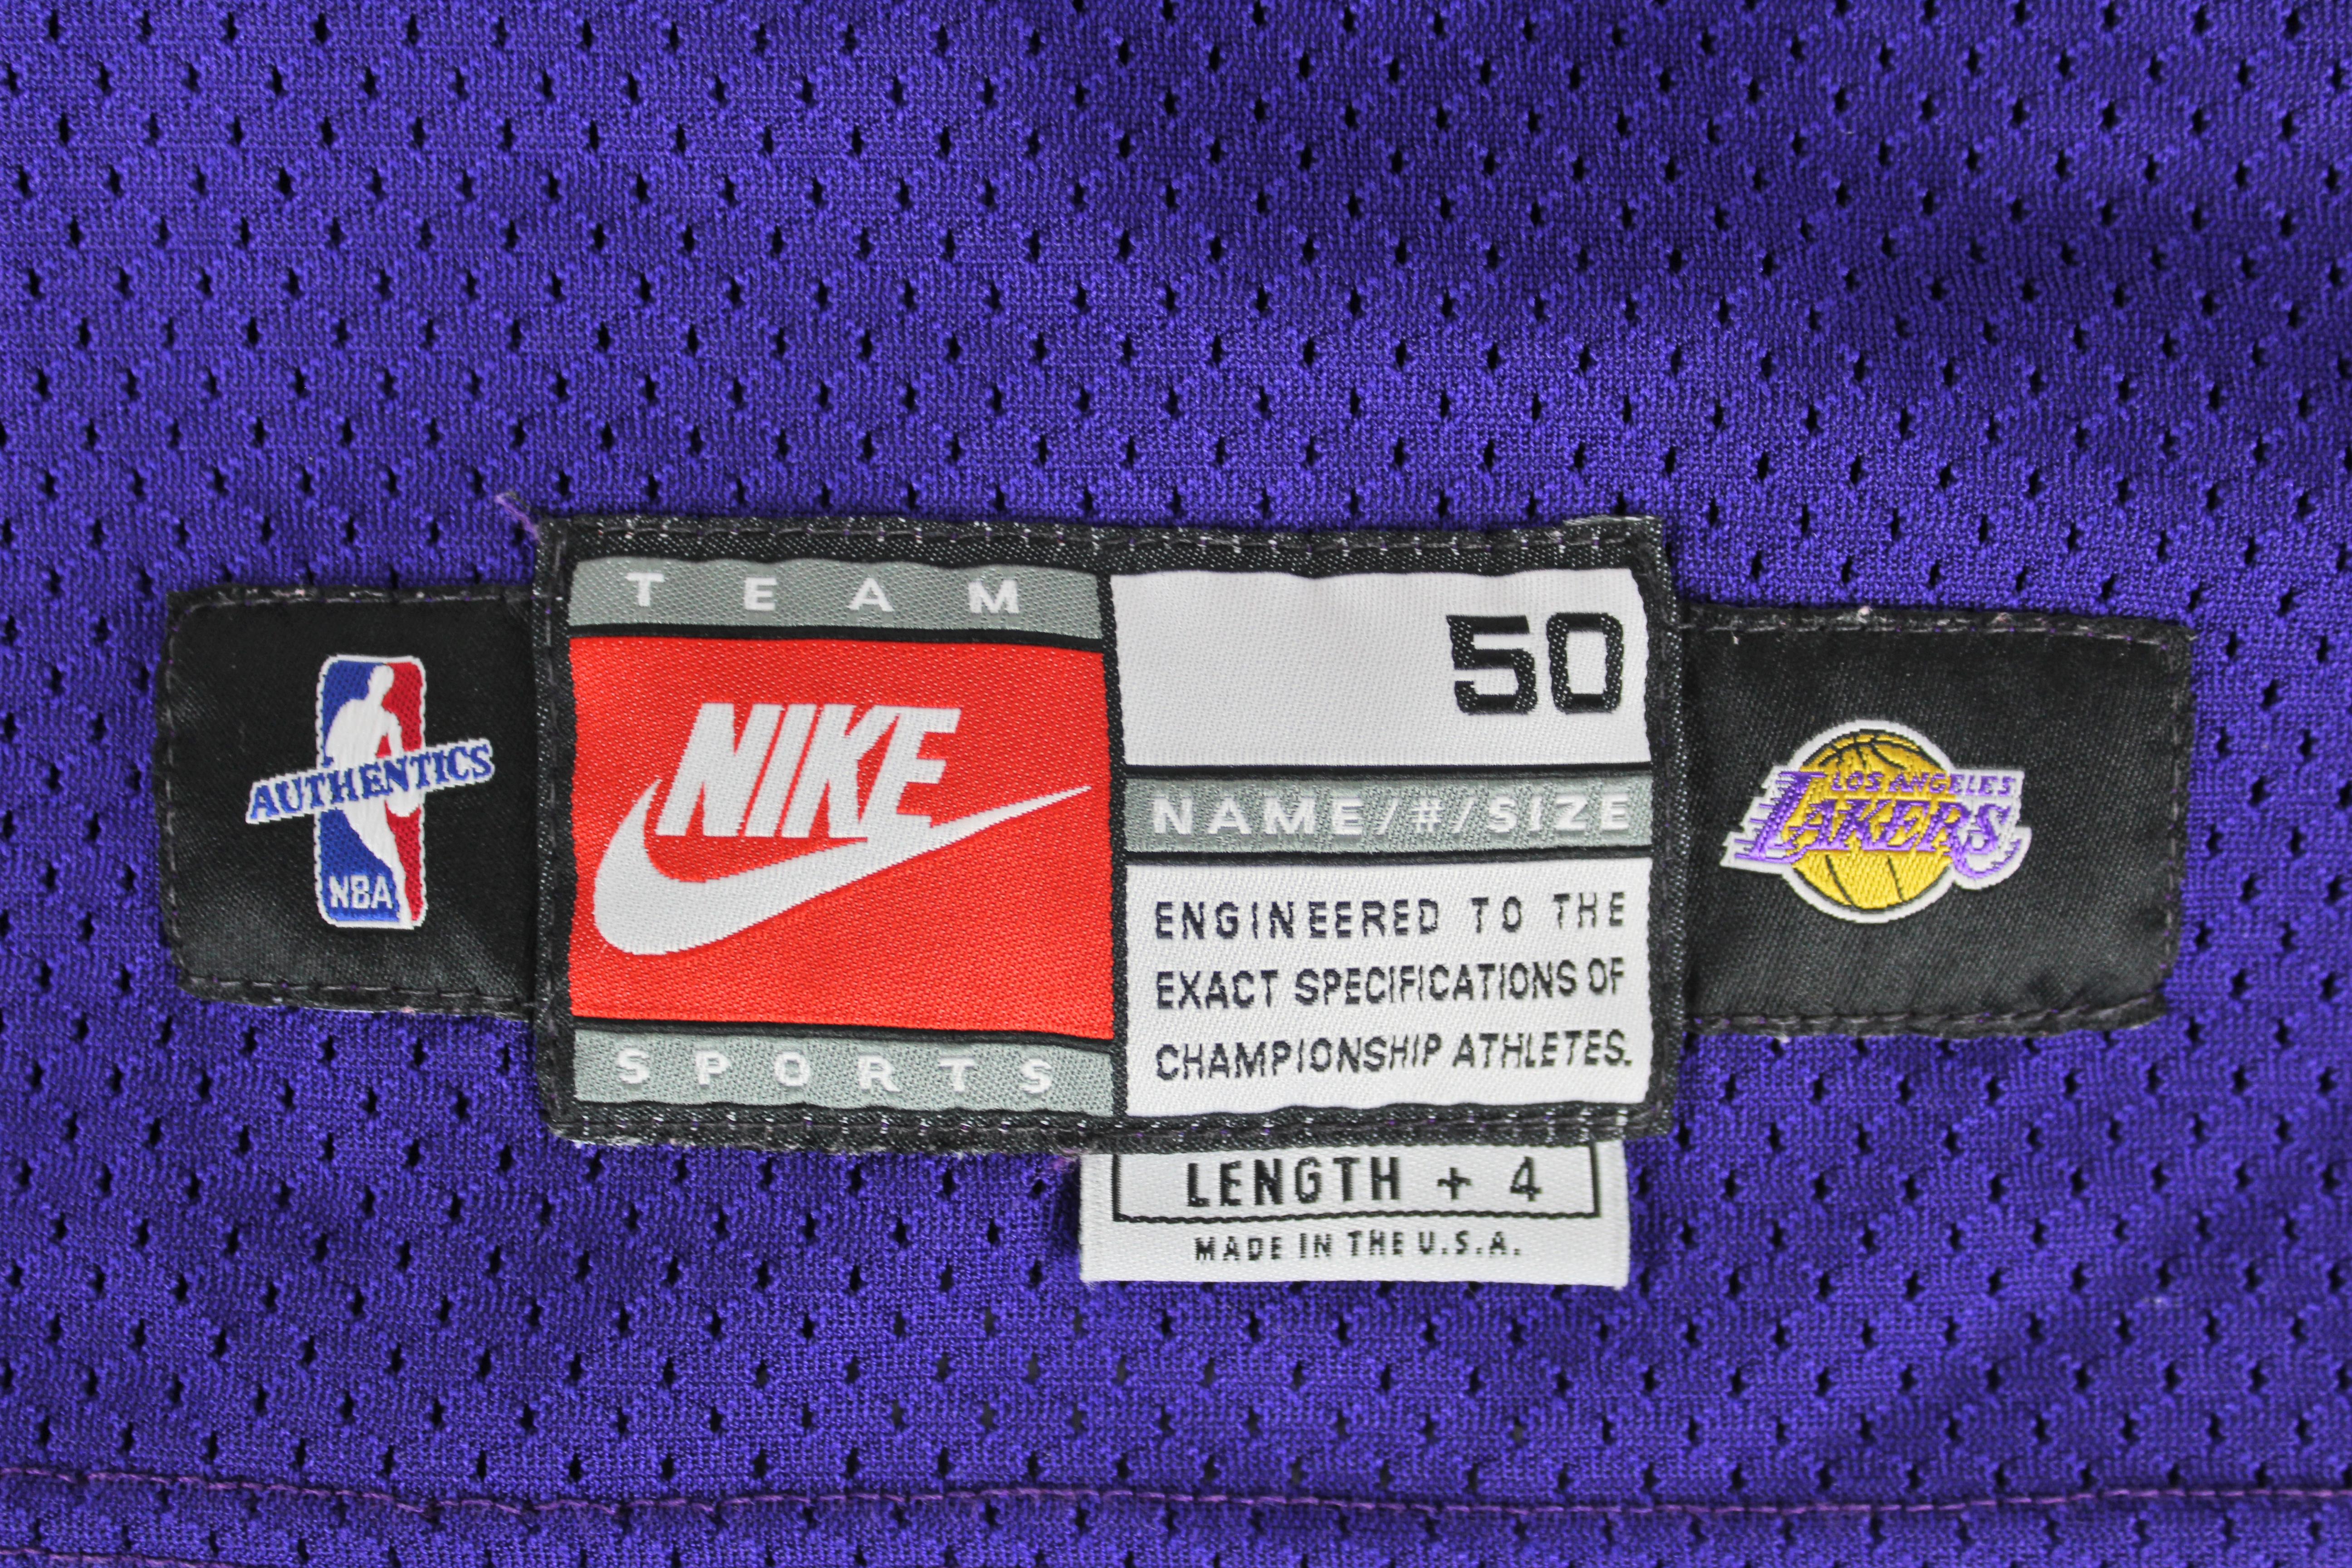 Kobe-Bryant-1998-99-Game-Worn-Lakers-Jersey-59806w - Hollywood Memorabilia,  Fine Autographs, & Consignments Blog